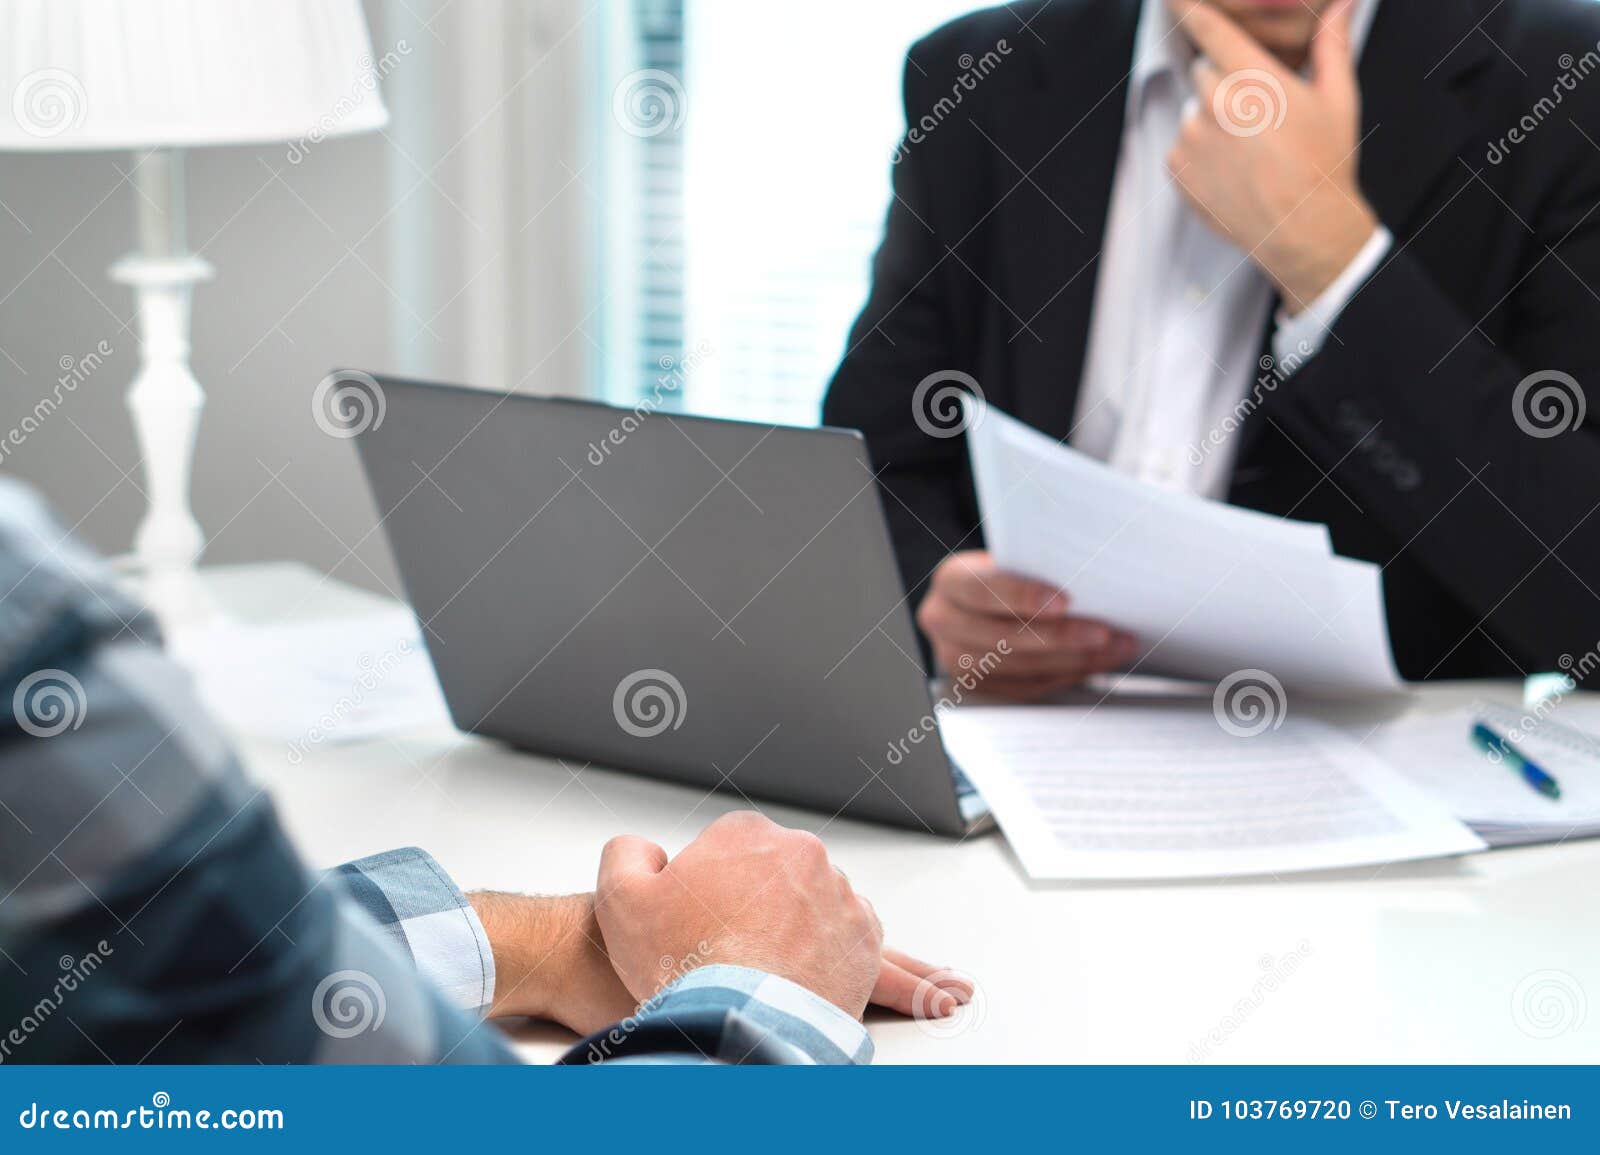 job interview or meeting with bank worker in office.